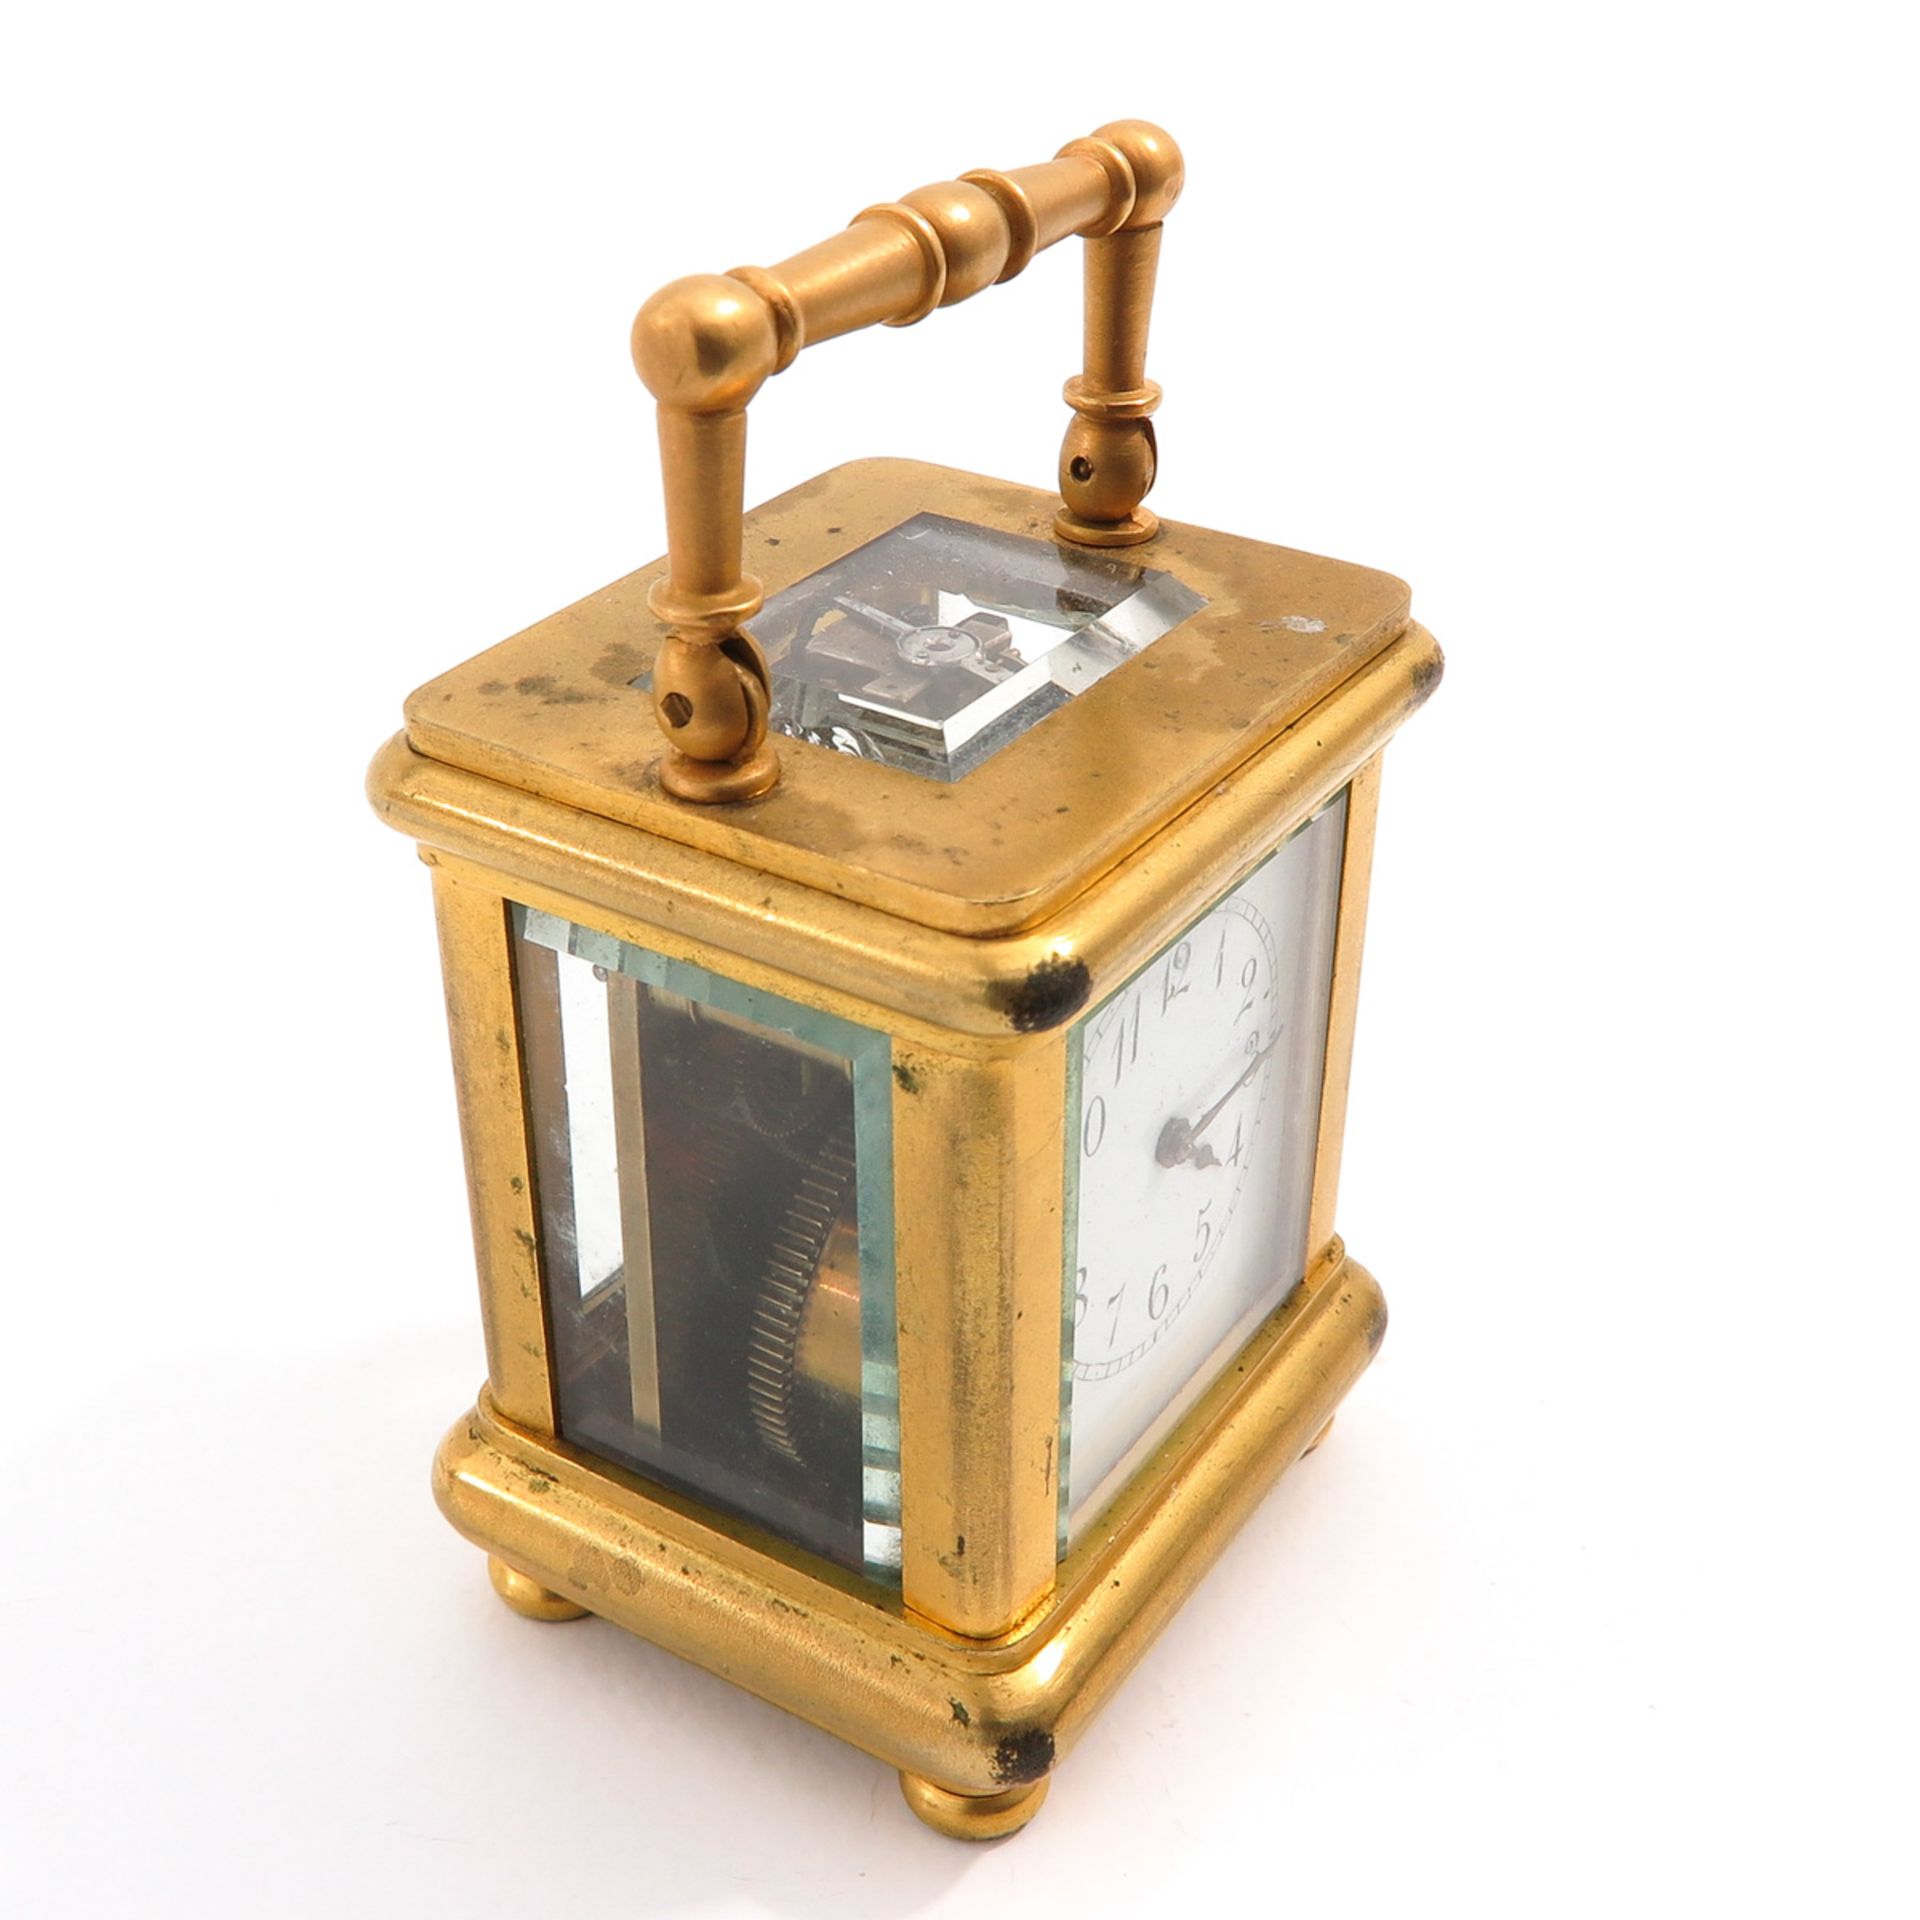 A Le Roy & Fils Carriage Clock - Image 8 of 8